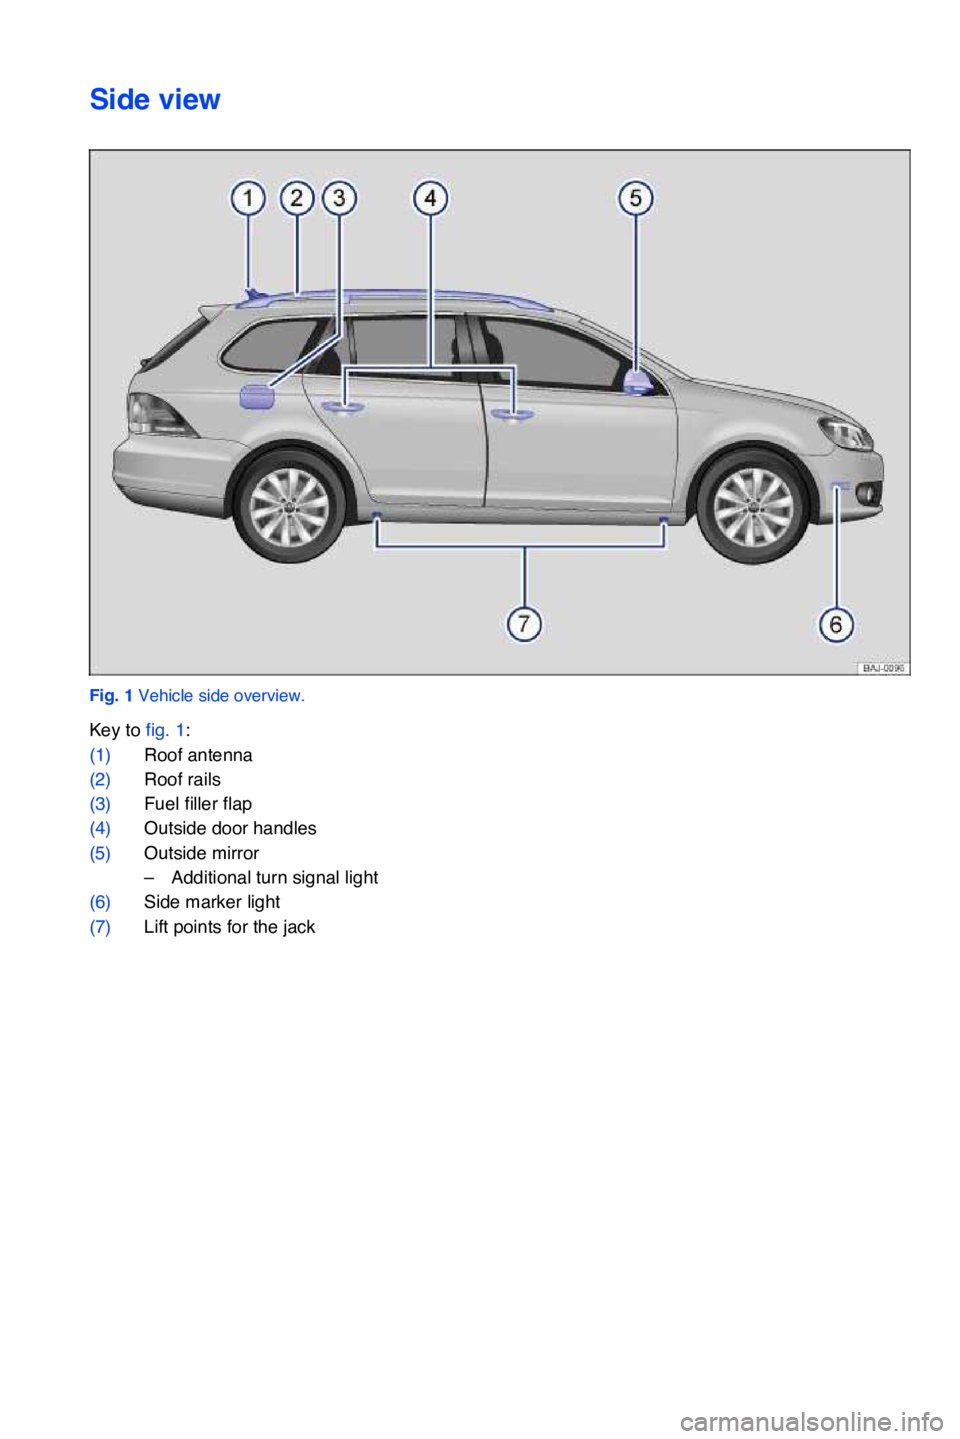 VOLKSWAGEN JETTA SPORTWAGEN 2012  Owners Manual Side view
Fig. 1 Vehicle side overview.
Key to fig. 1:
(1)Roof antenna 
(2)Roof rails 
(3)Fuel filler flap 
(4)Outside door handles
(5)Outside mirror 
–Additional turn signal light 
(6)Side marker l